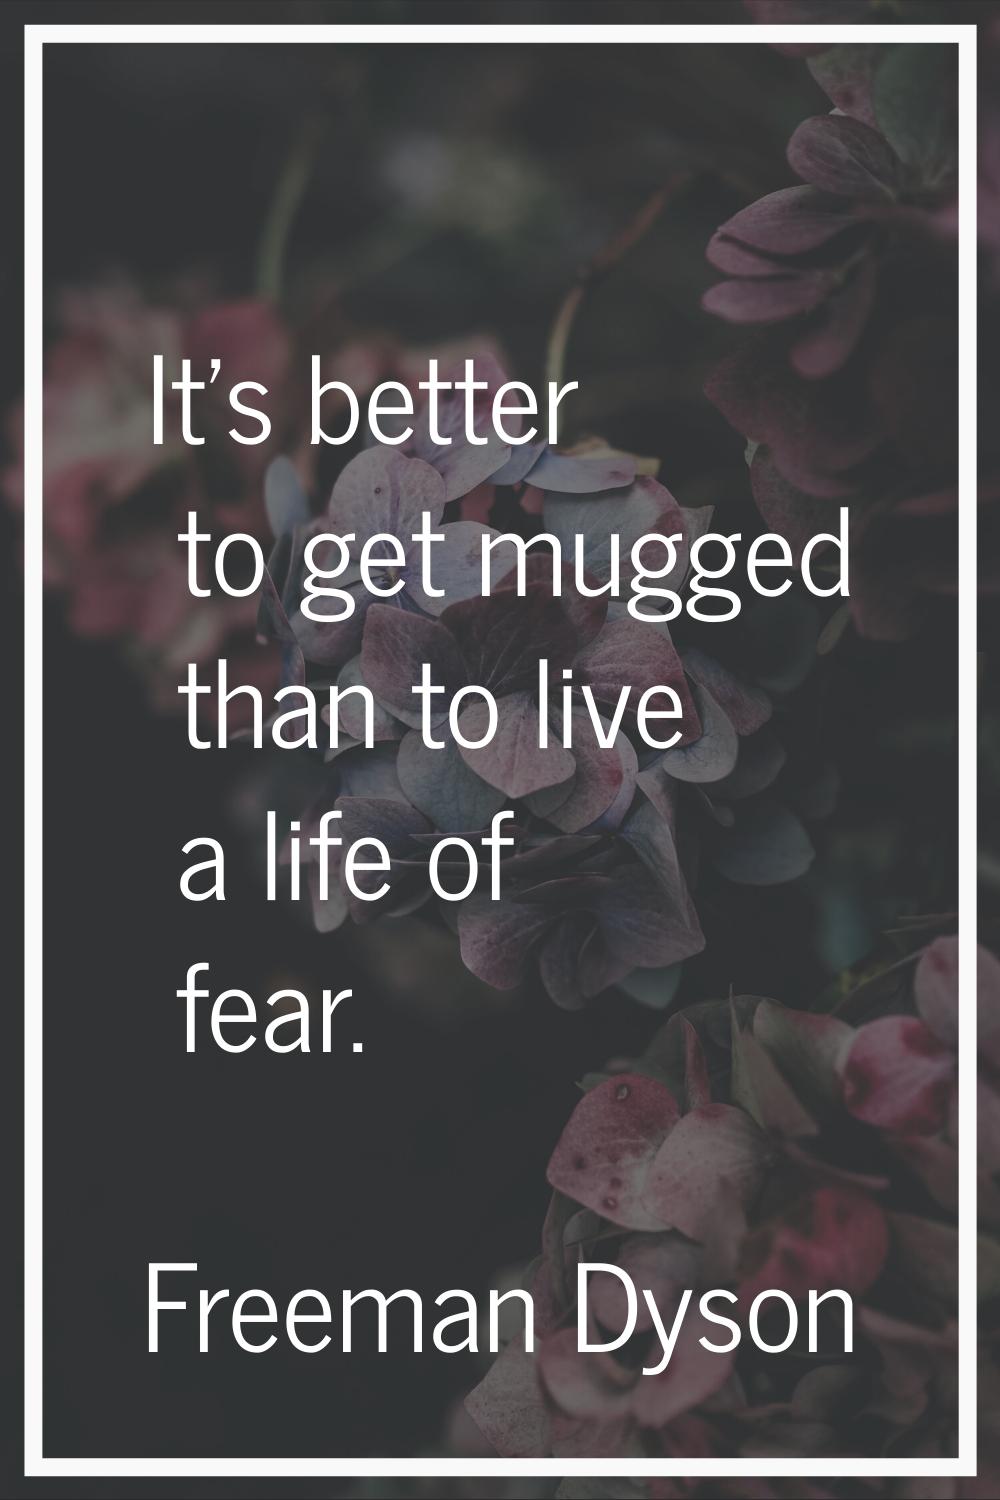 It's better to get mugged than to live a life of fear.